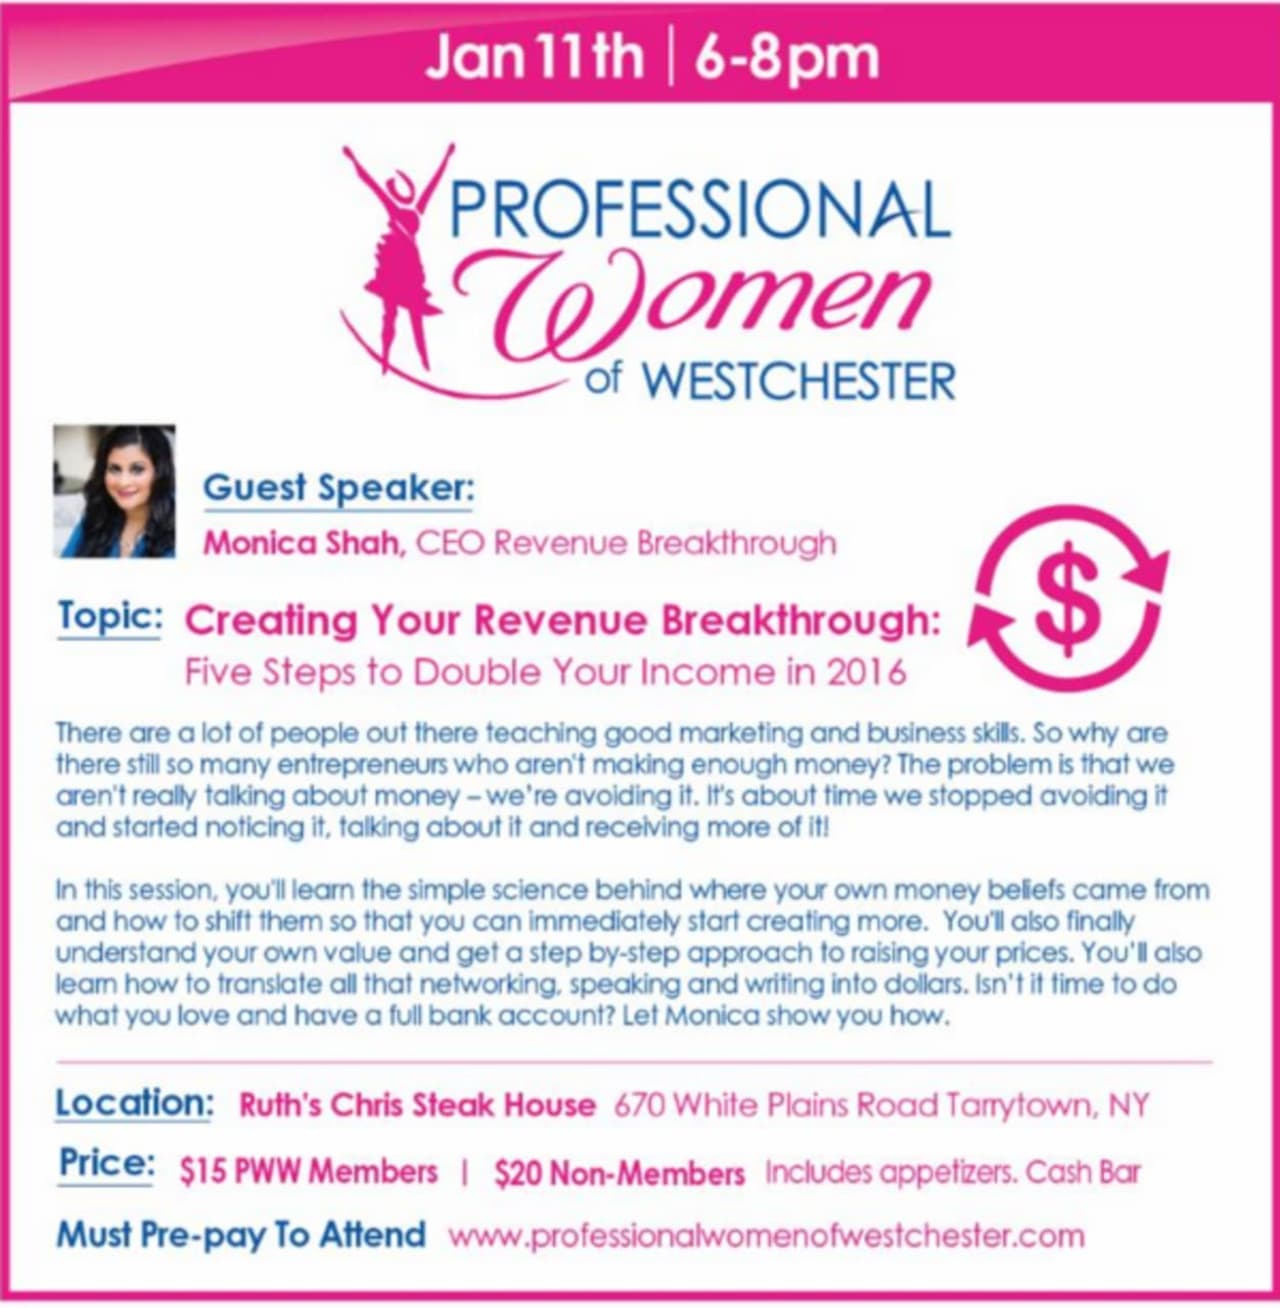 The Professional Women of Westchester will host a speech by Monica Shah, CEO of Revenue Breakthrough, from 6 - 8 p.m. Monday, Jan. 11.